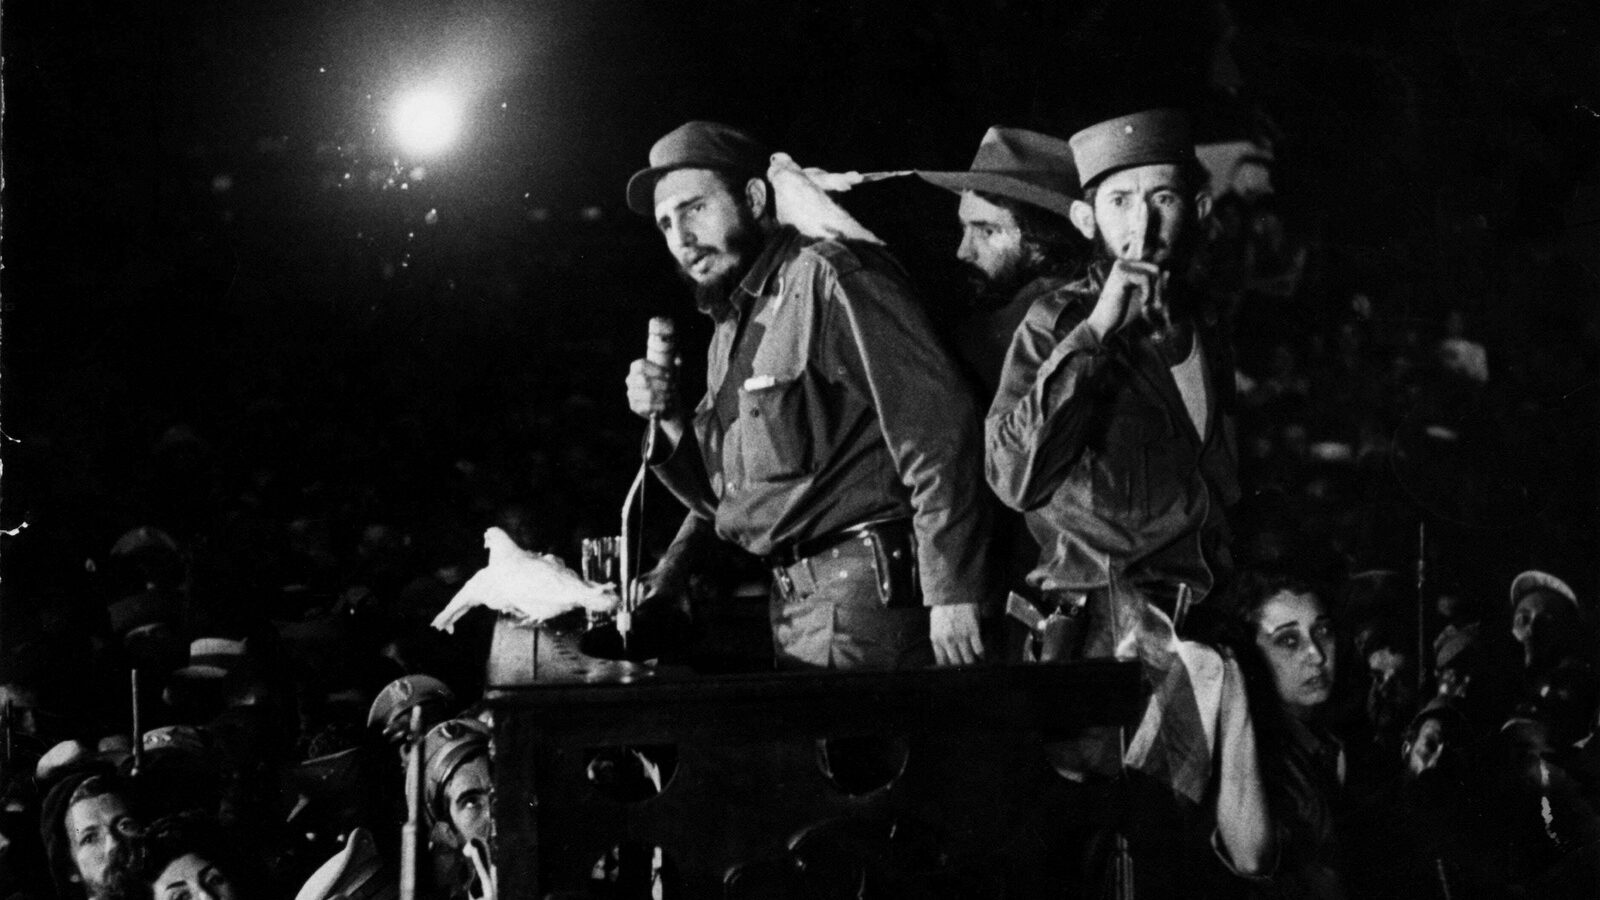 In this Jan. 8, 1959 file photo, Cuba's Fidel Castro speaks to supporters at the Batista military base "Columbia," now known as Ciudad Libertad, in Cuba. (AP Photo)